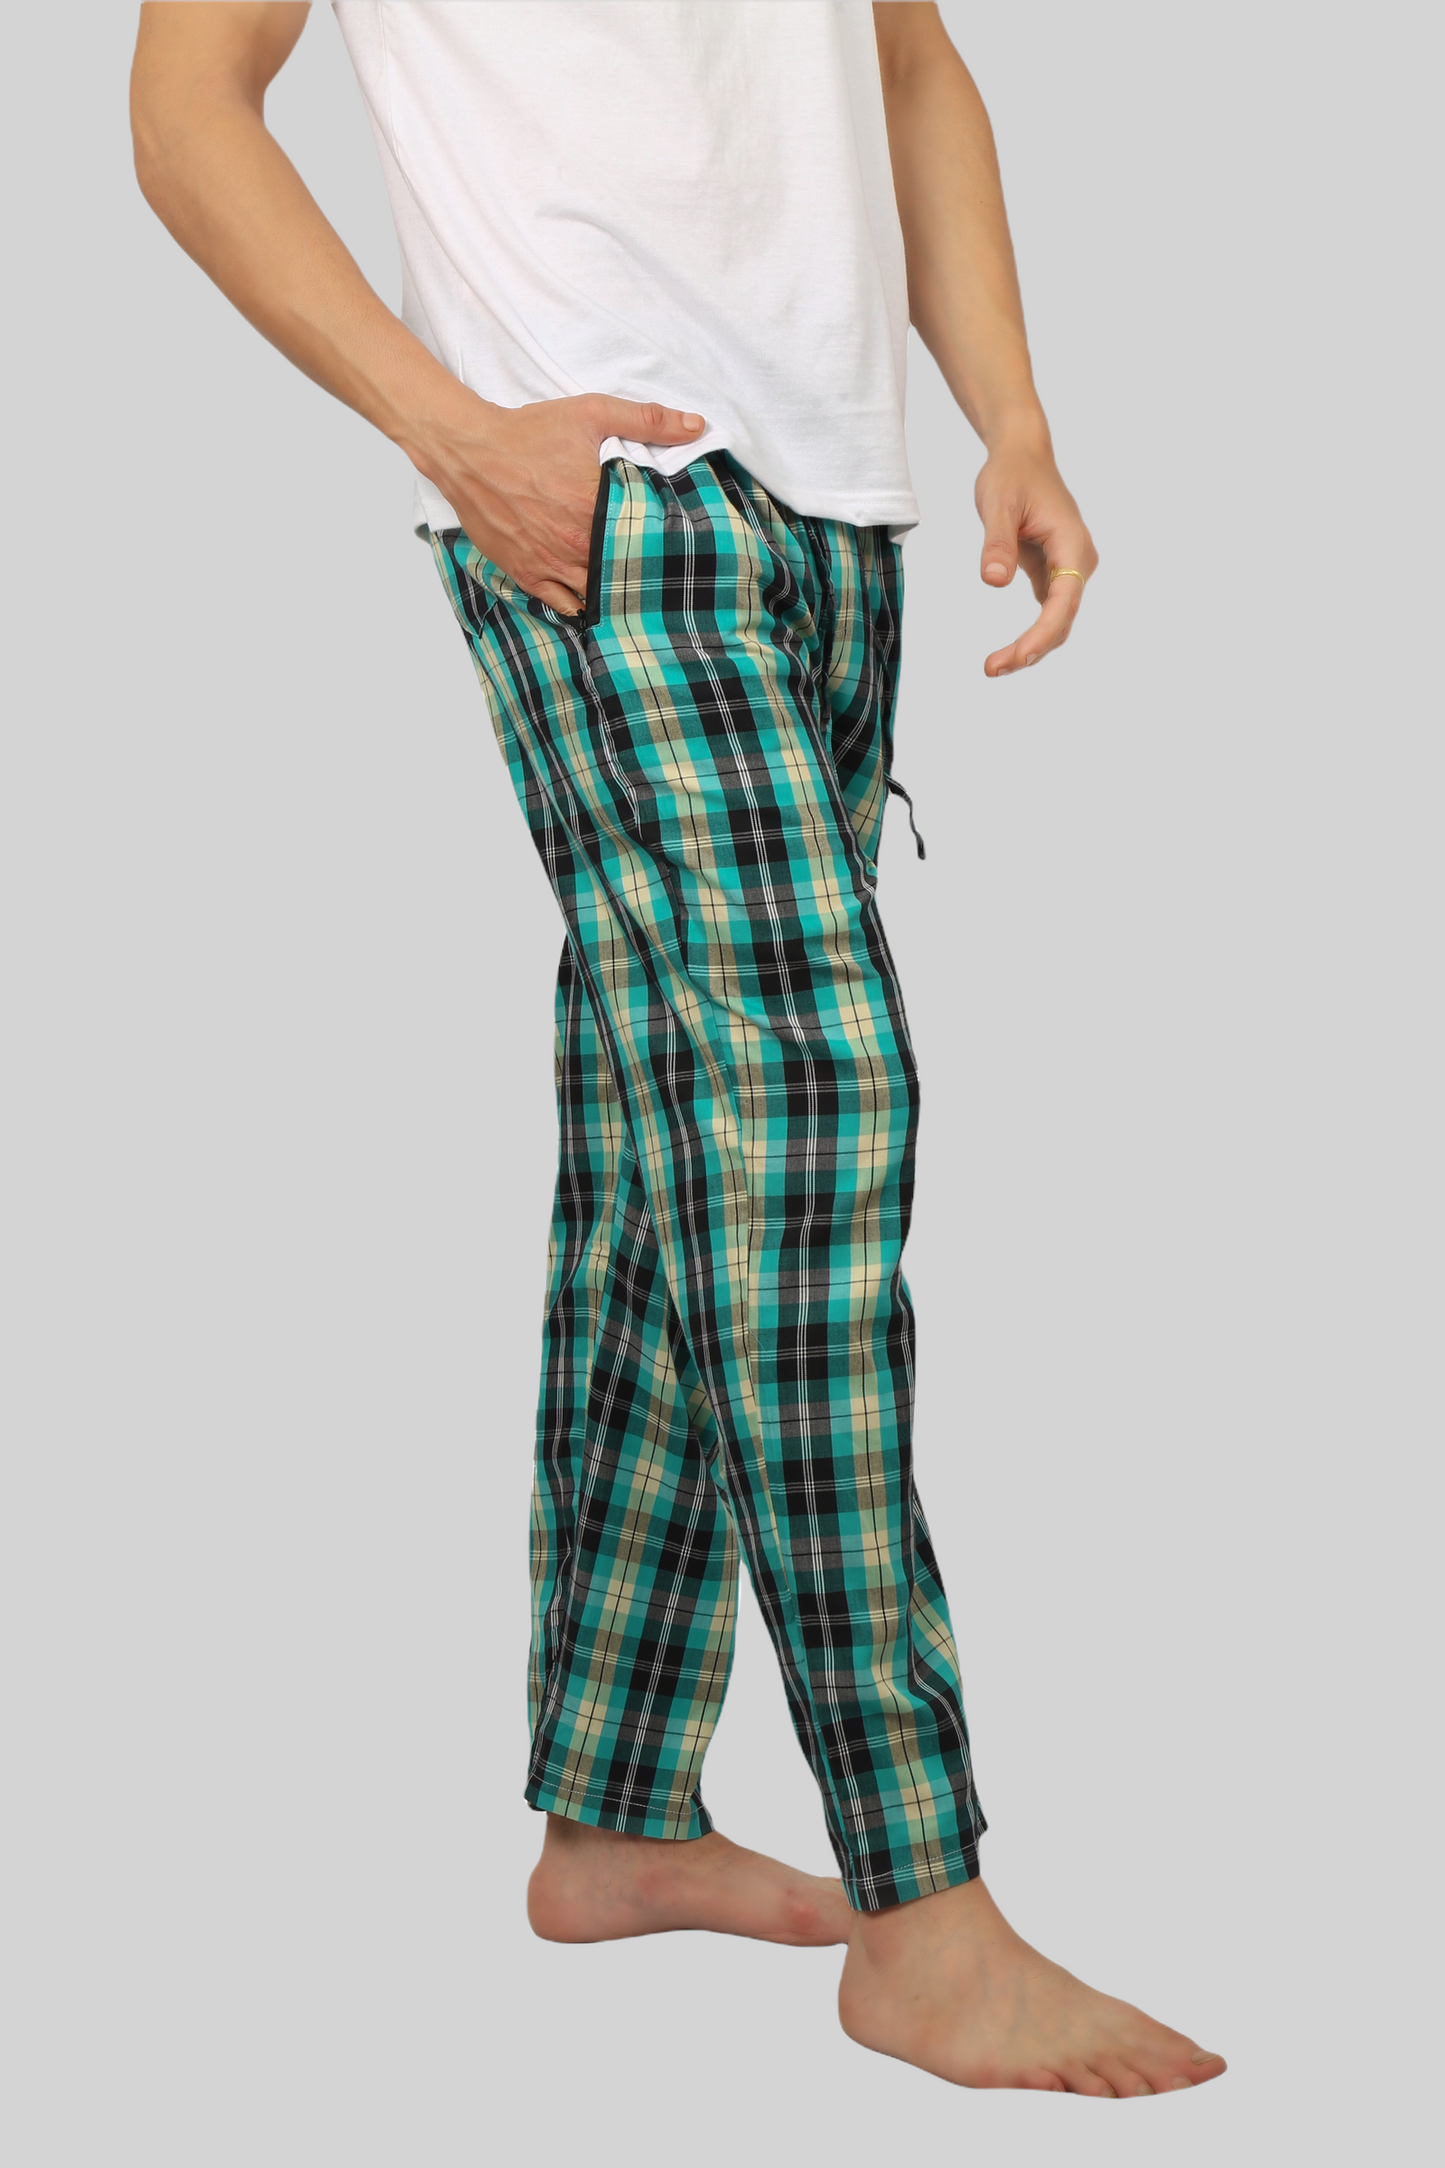 Cyan Blue soft and super comfortable checkered pajamas for men